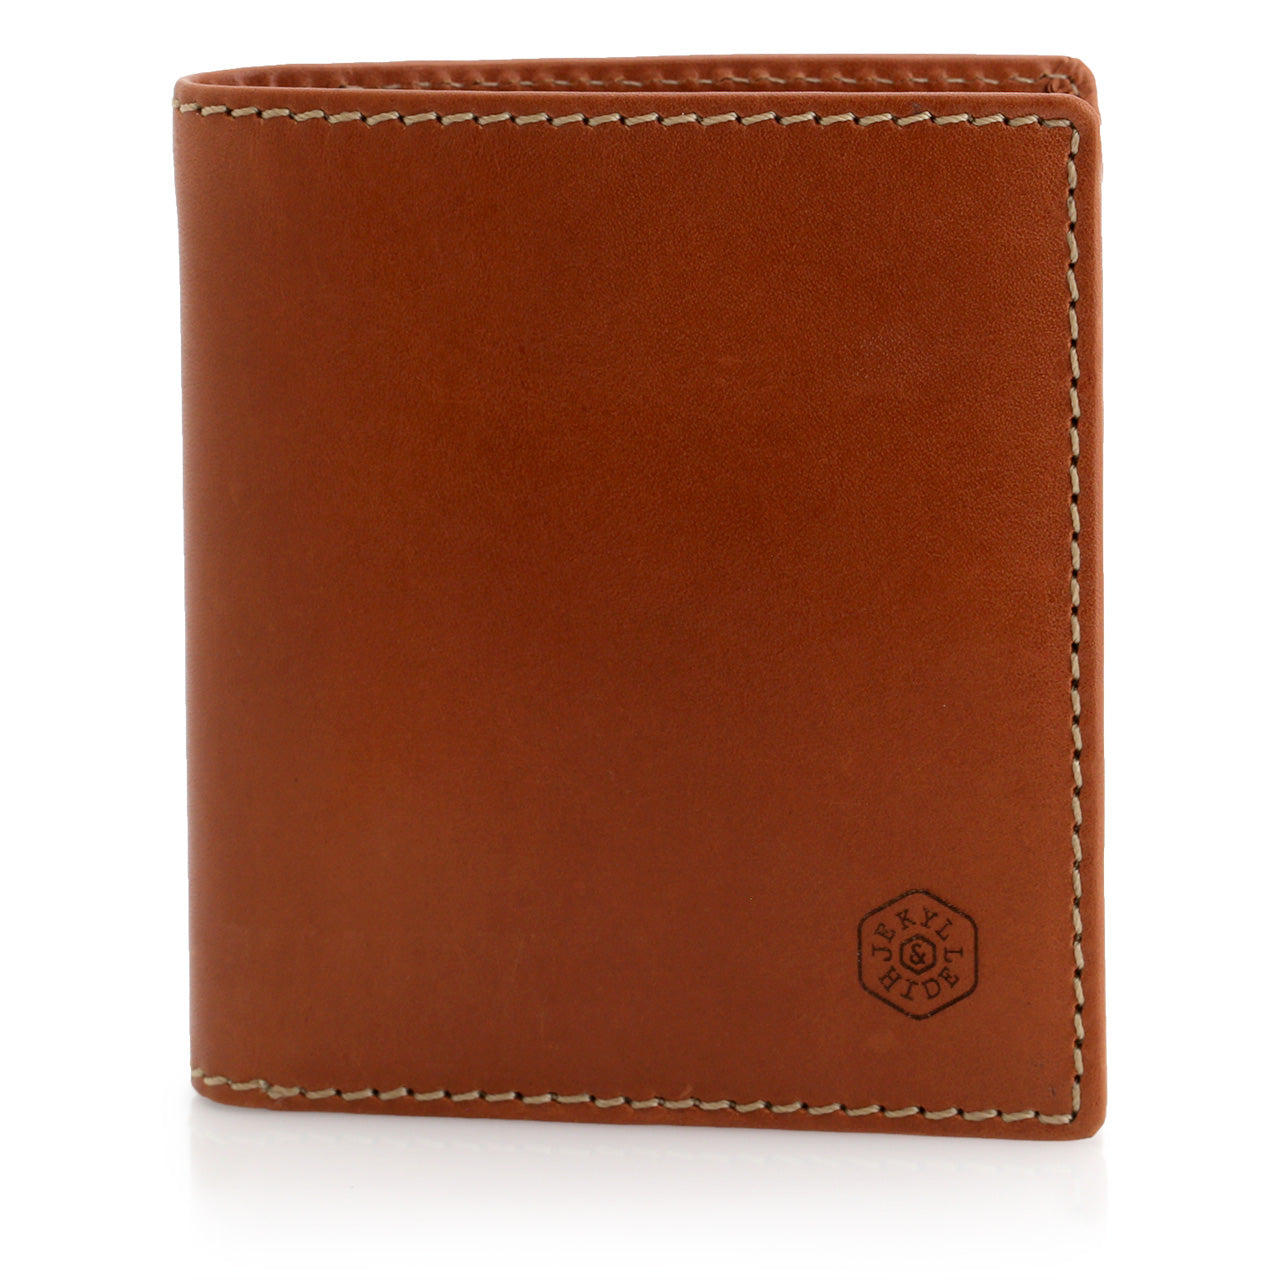 Jekyll and Hyde Bifold Card Holder with zippered coin pouch, Roma Tan